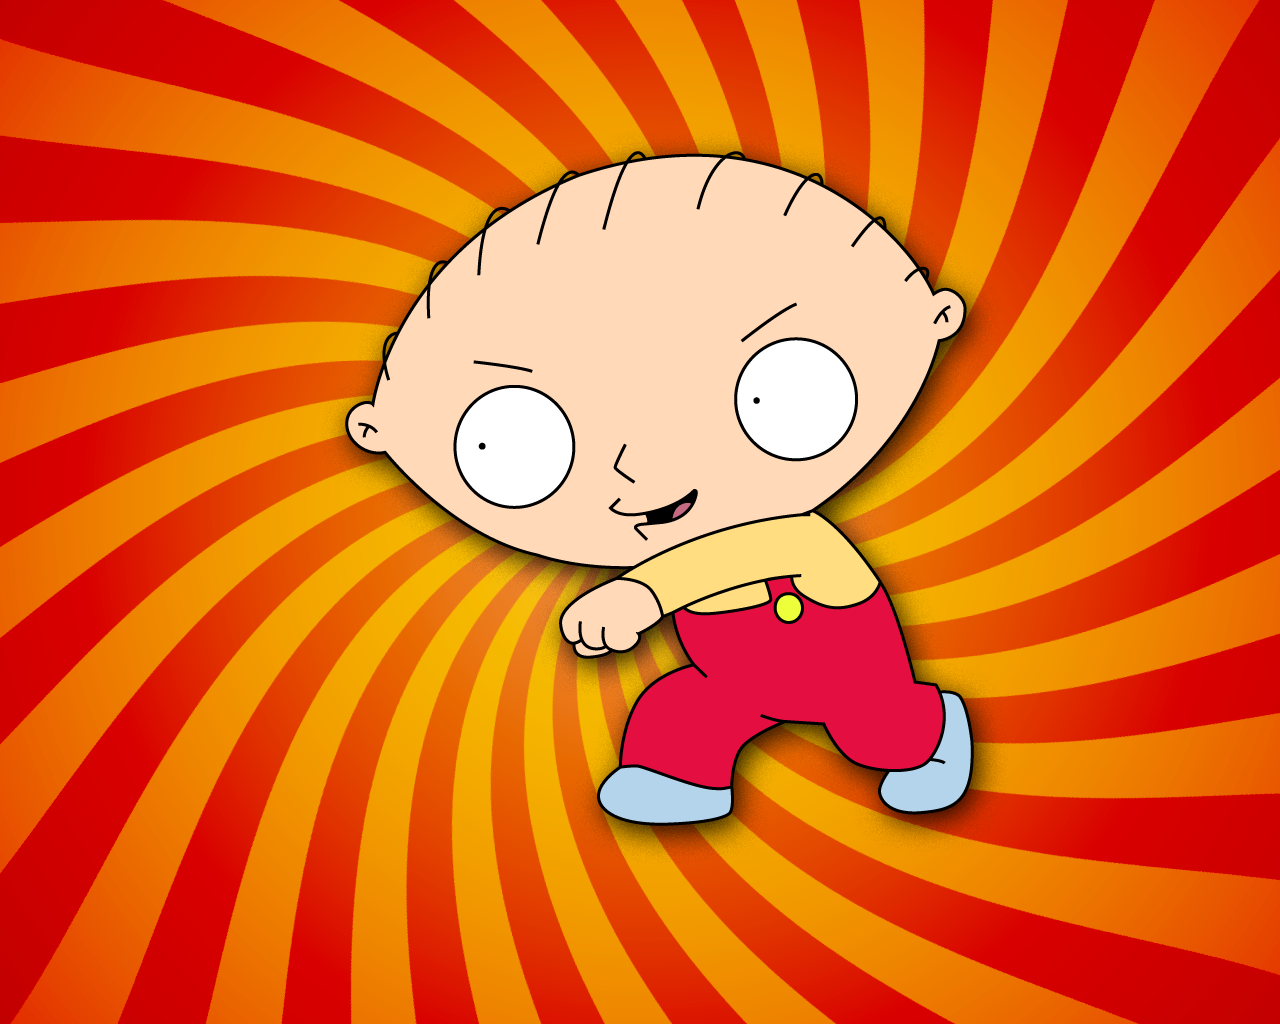 Rate Select Rating Give Stewie